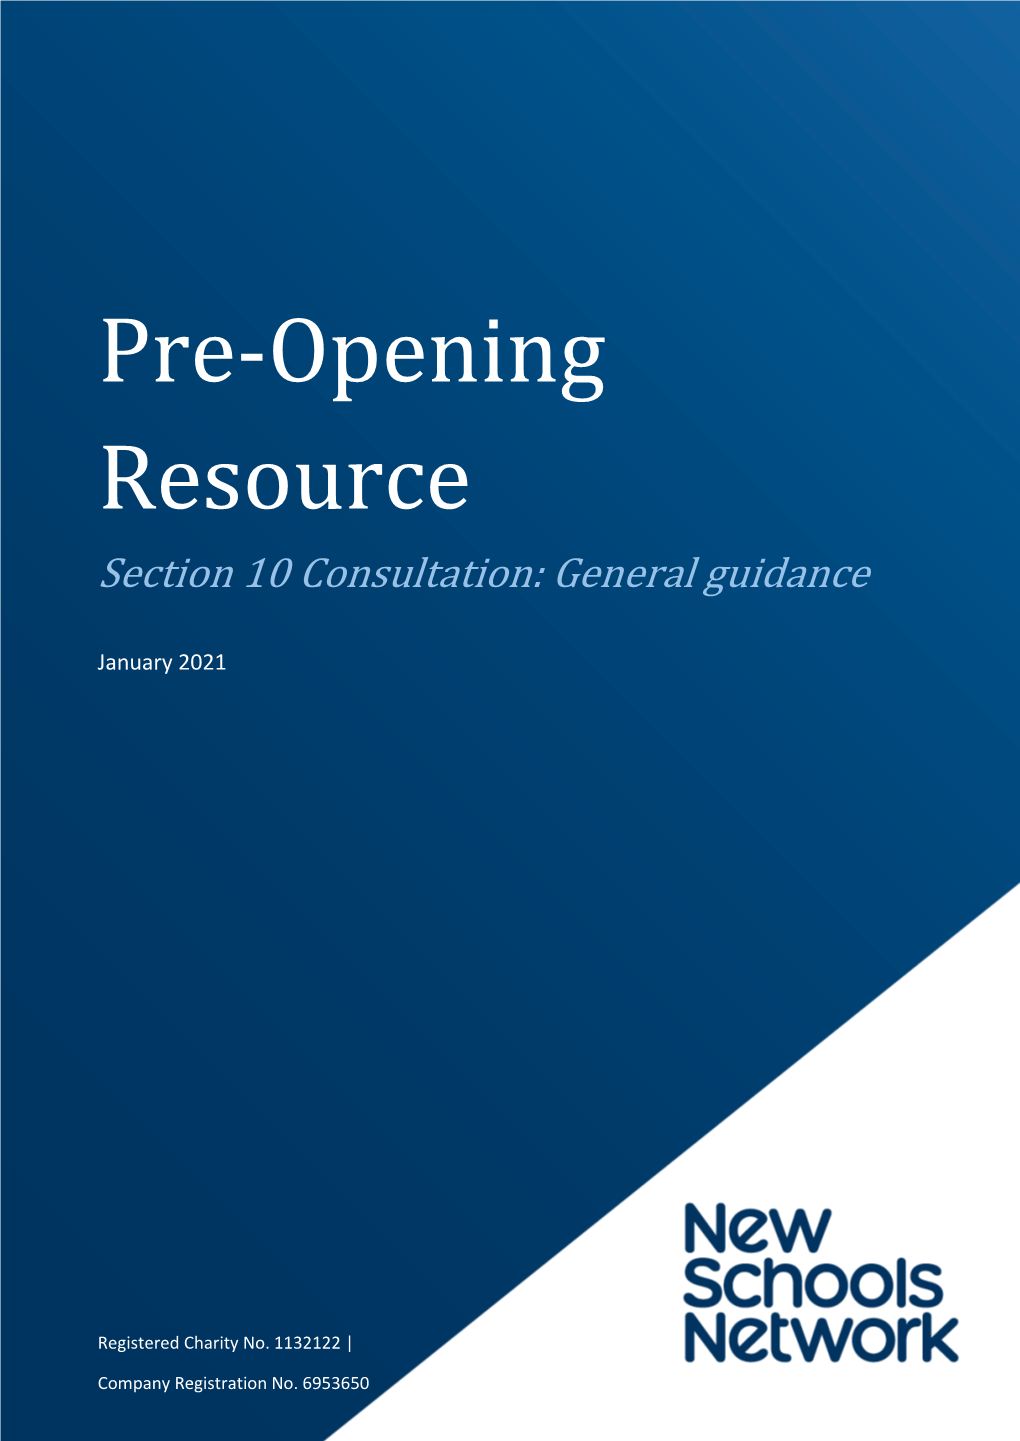 Pre-Opening Resource Section 10 Consultation: General Guidance